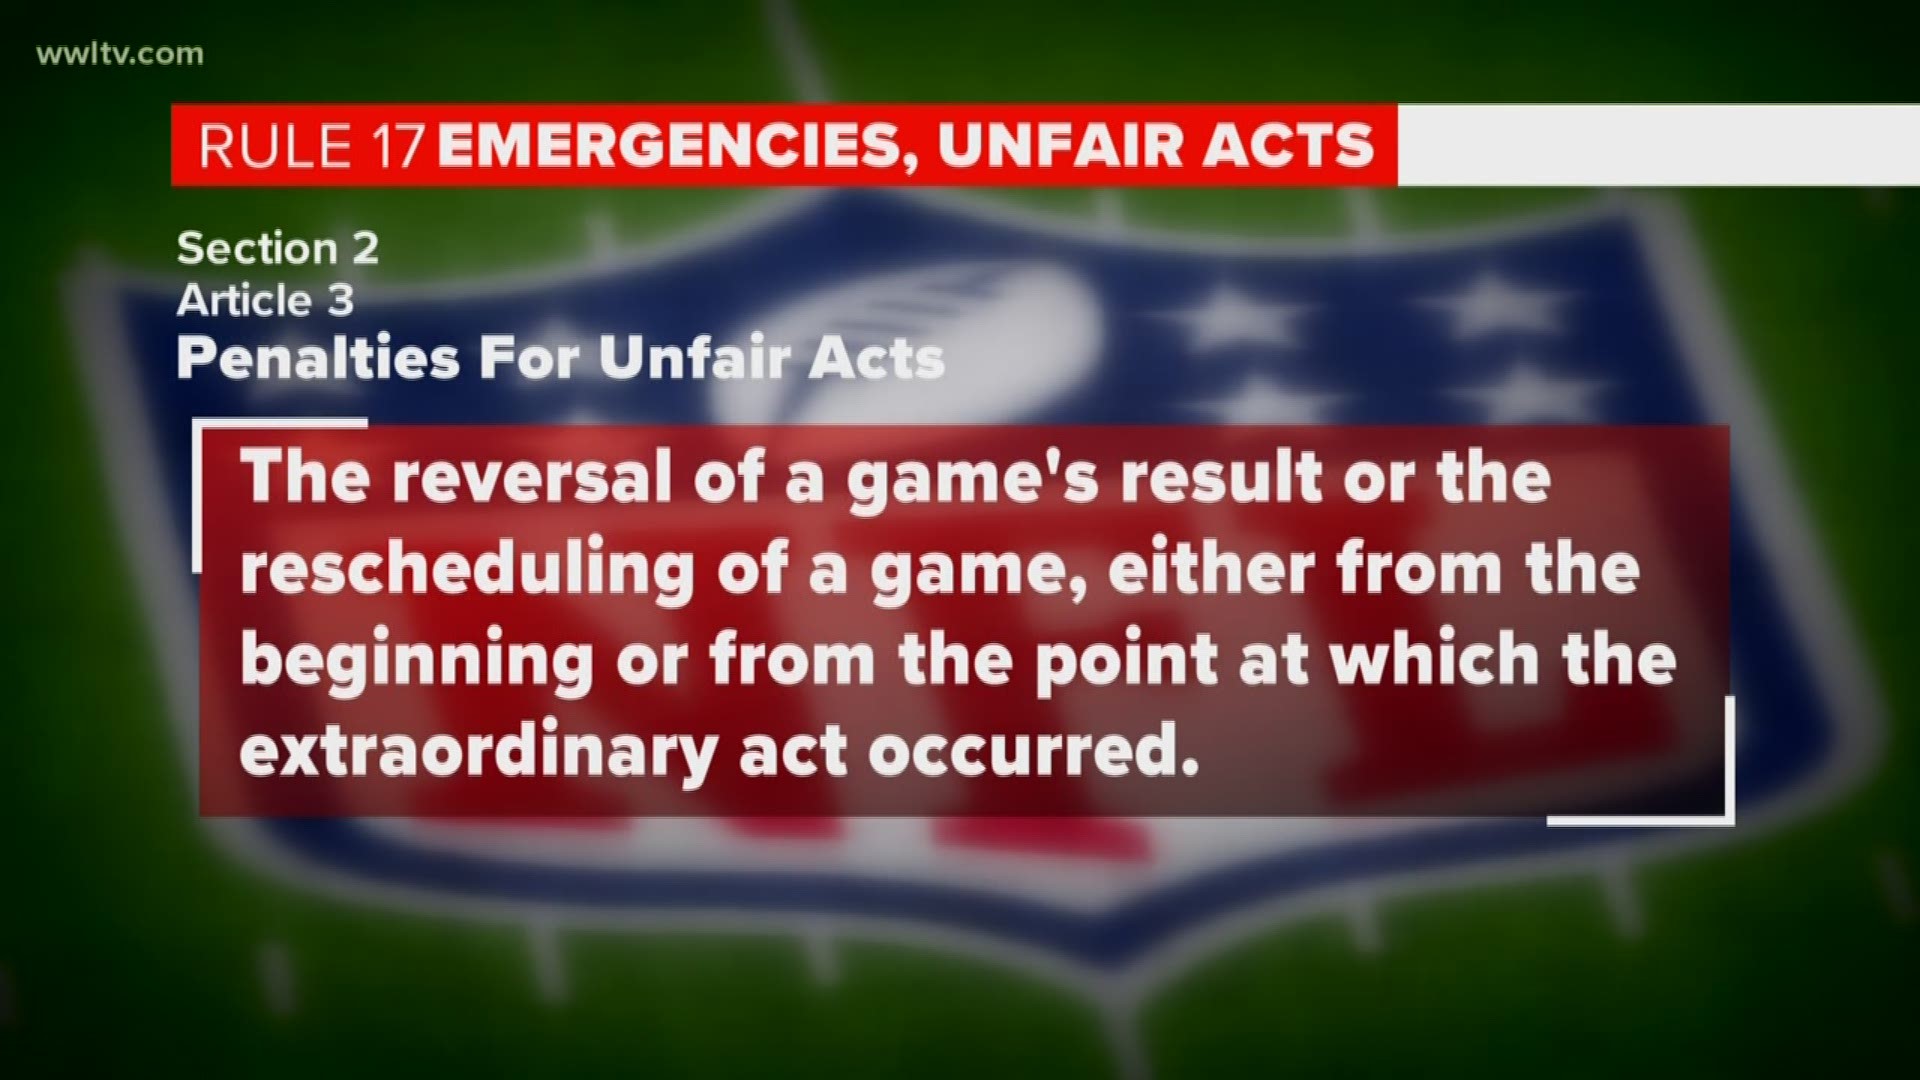 New Orleans Saints fans are pointing to section two, article three called "Penalties for Unfair Acts" under the "Emergency Unfair Acts" rule in the NFL rulebook.